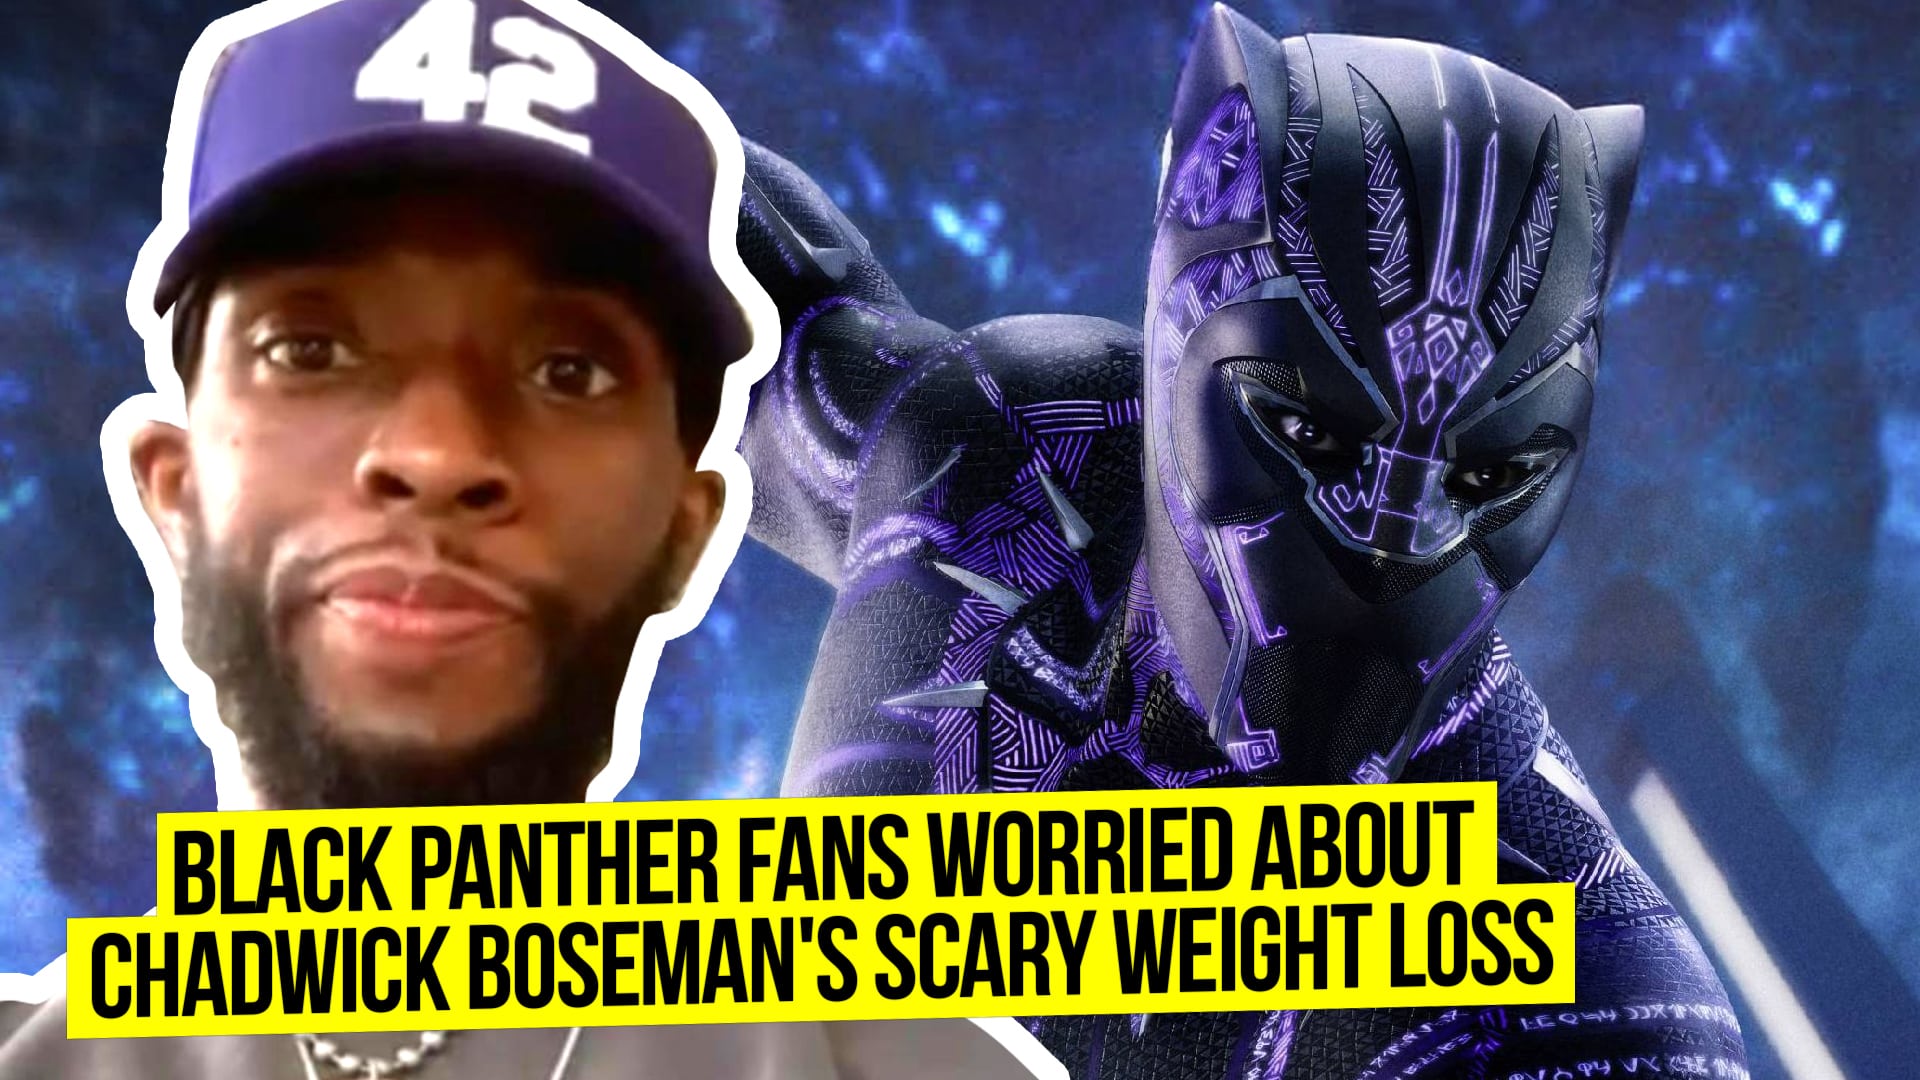 Black Panther Fans Worried About Chadwick Boseman’s Scary Weight Loss